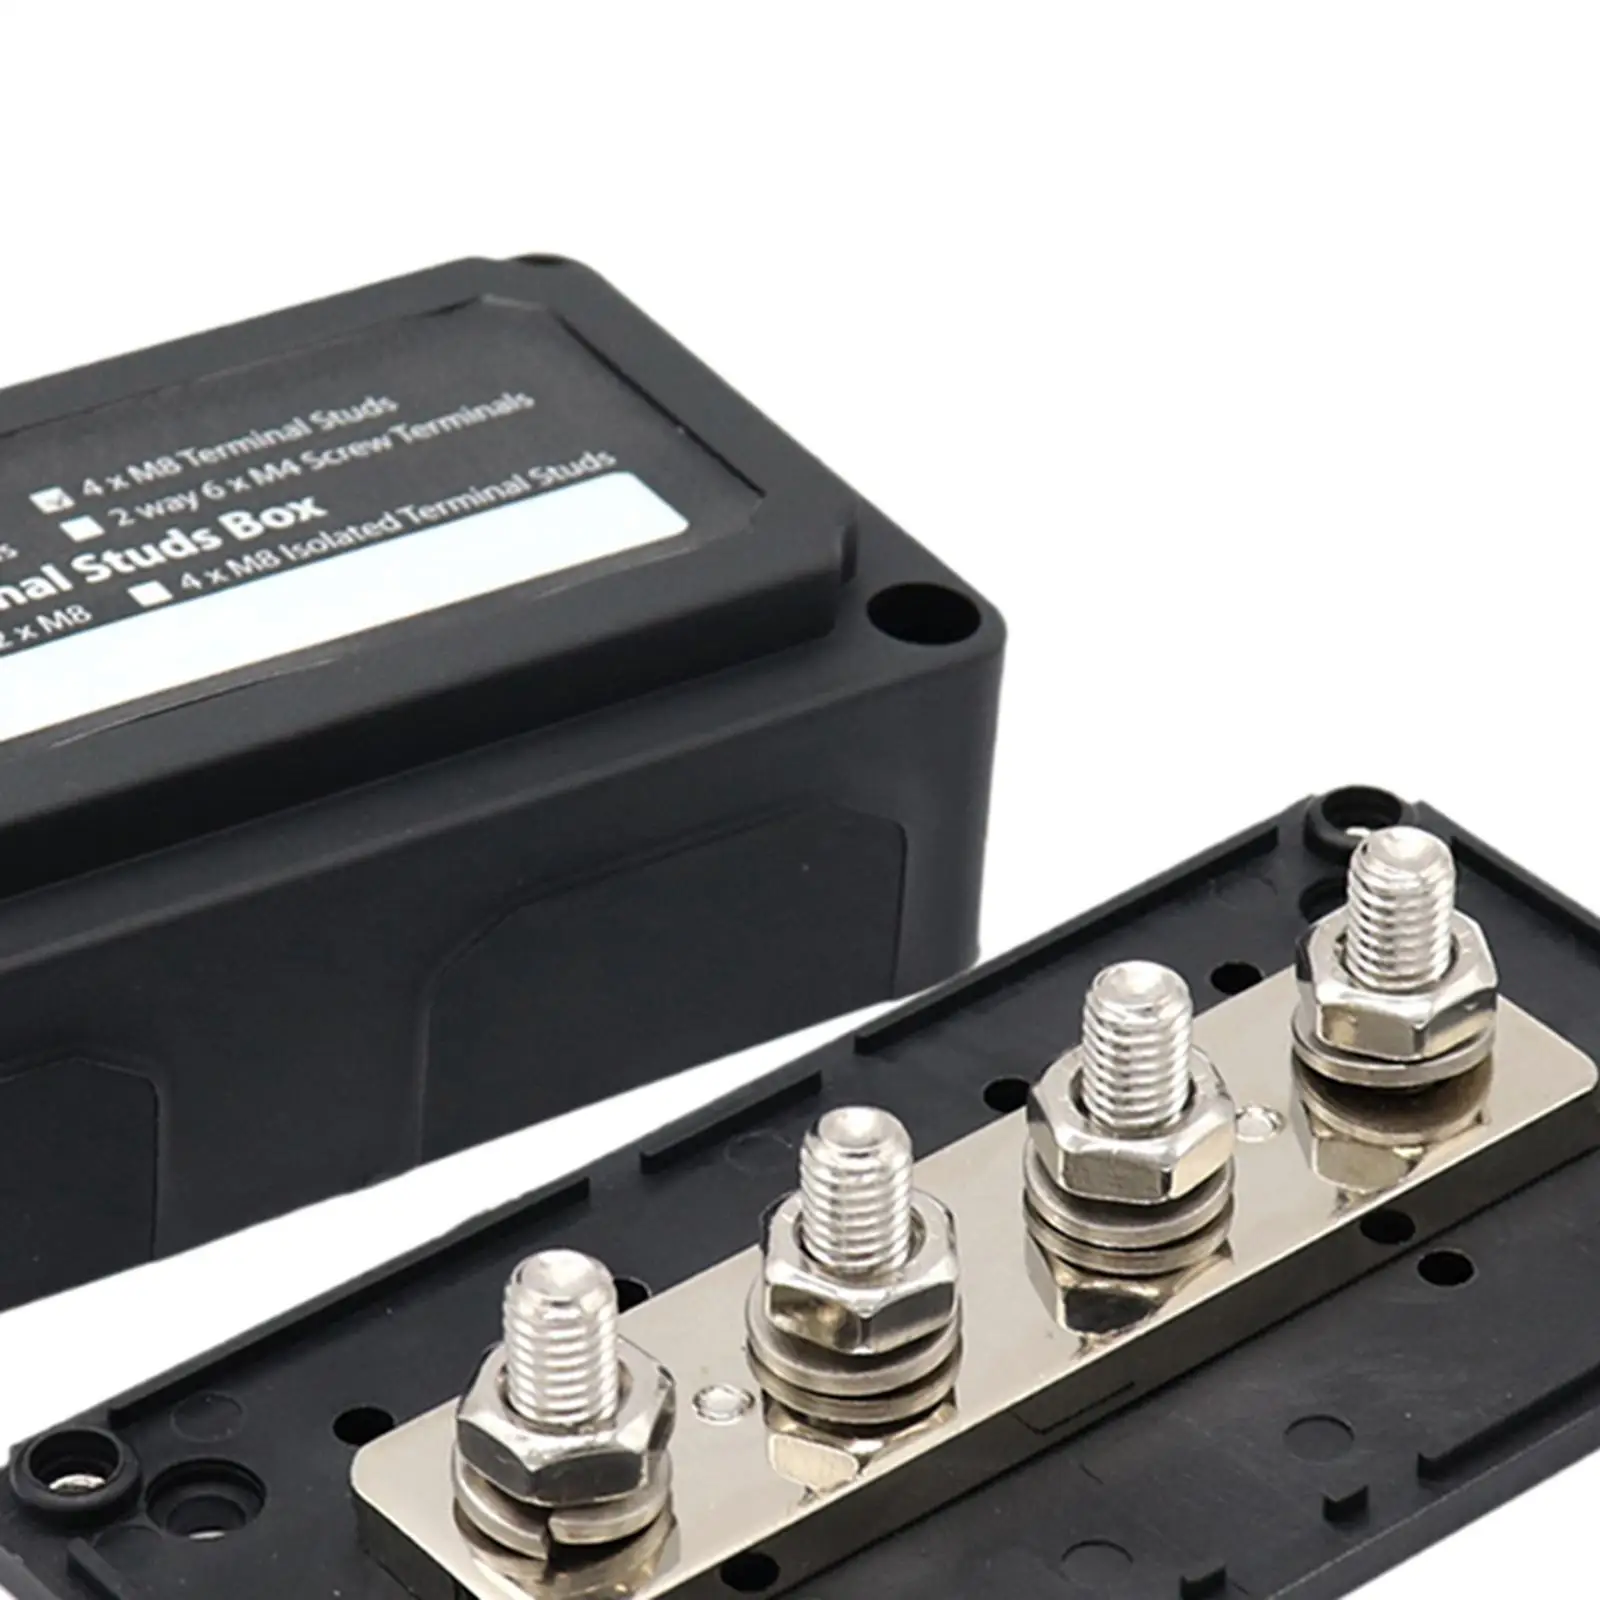 Power Distribution Box Accessories Durable 4x M10 3/8`` Terminal Studs Direct Replaces 4 Way Busbar Box for Car Boat Truck